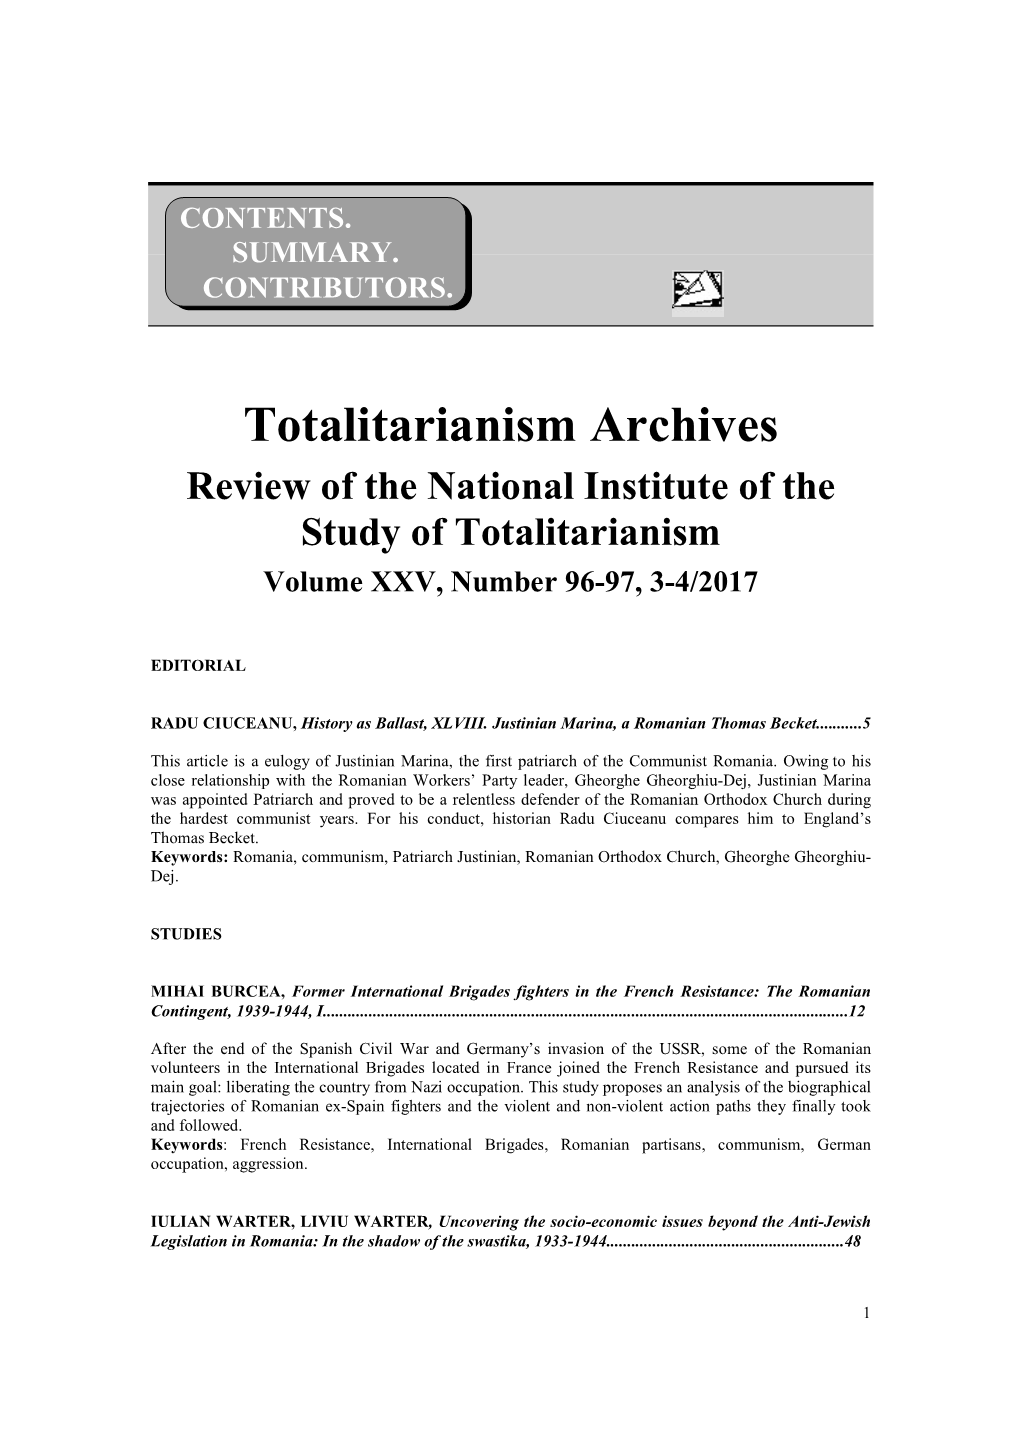 Totalitarianism Archives Review of the National Institute of the Study of Totalitarianism Volume XXV, Number 96-97, 3-4/2017